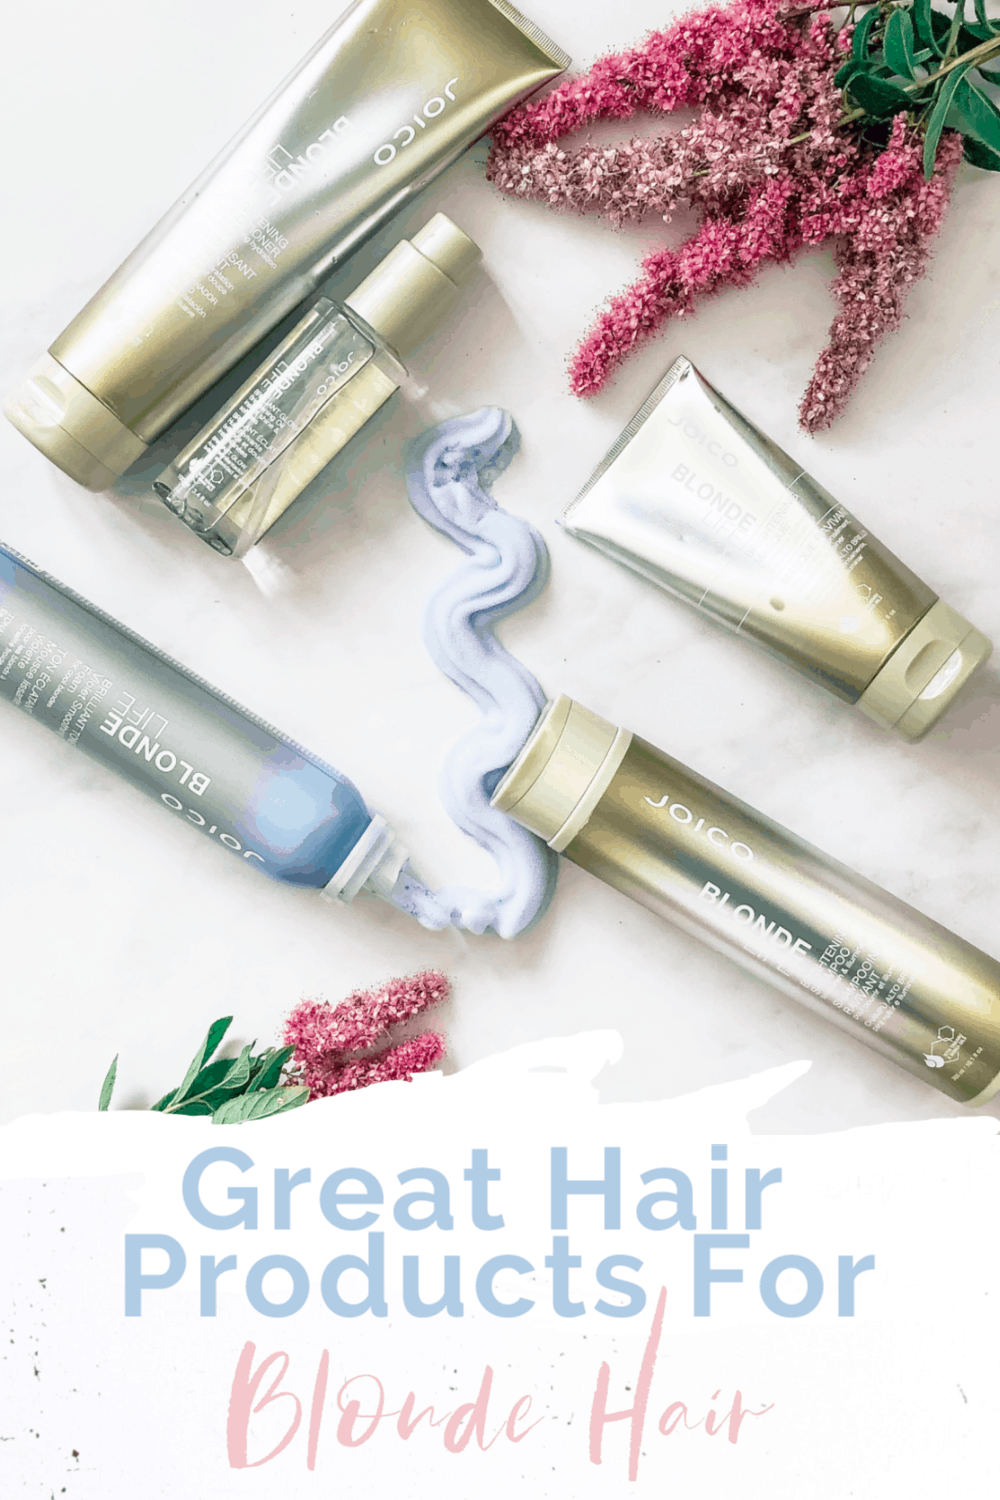 Gereat hair products for keeping hair blonde and healthy